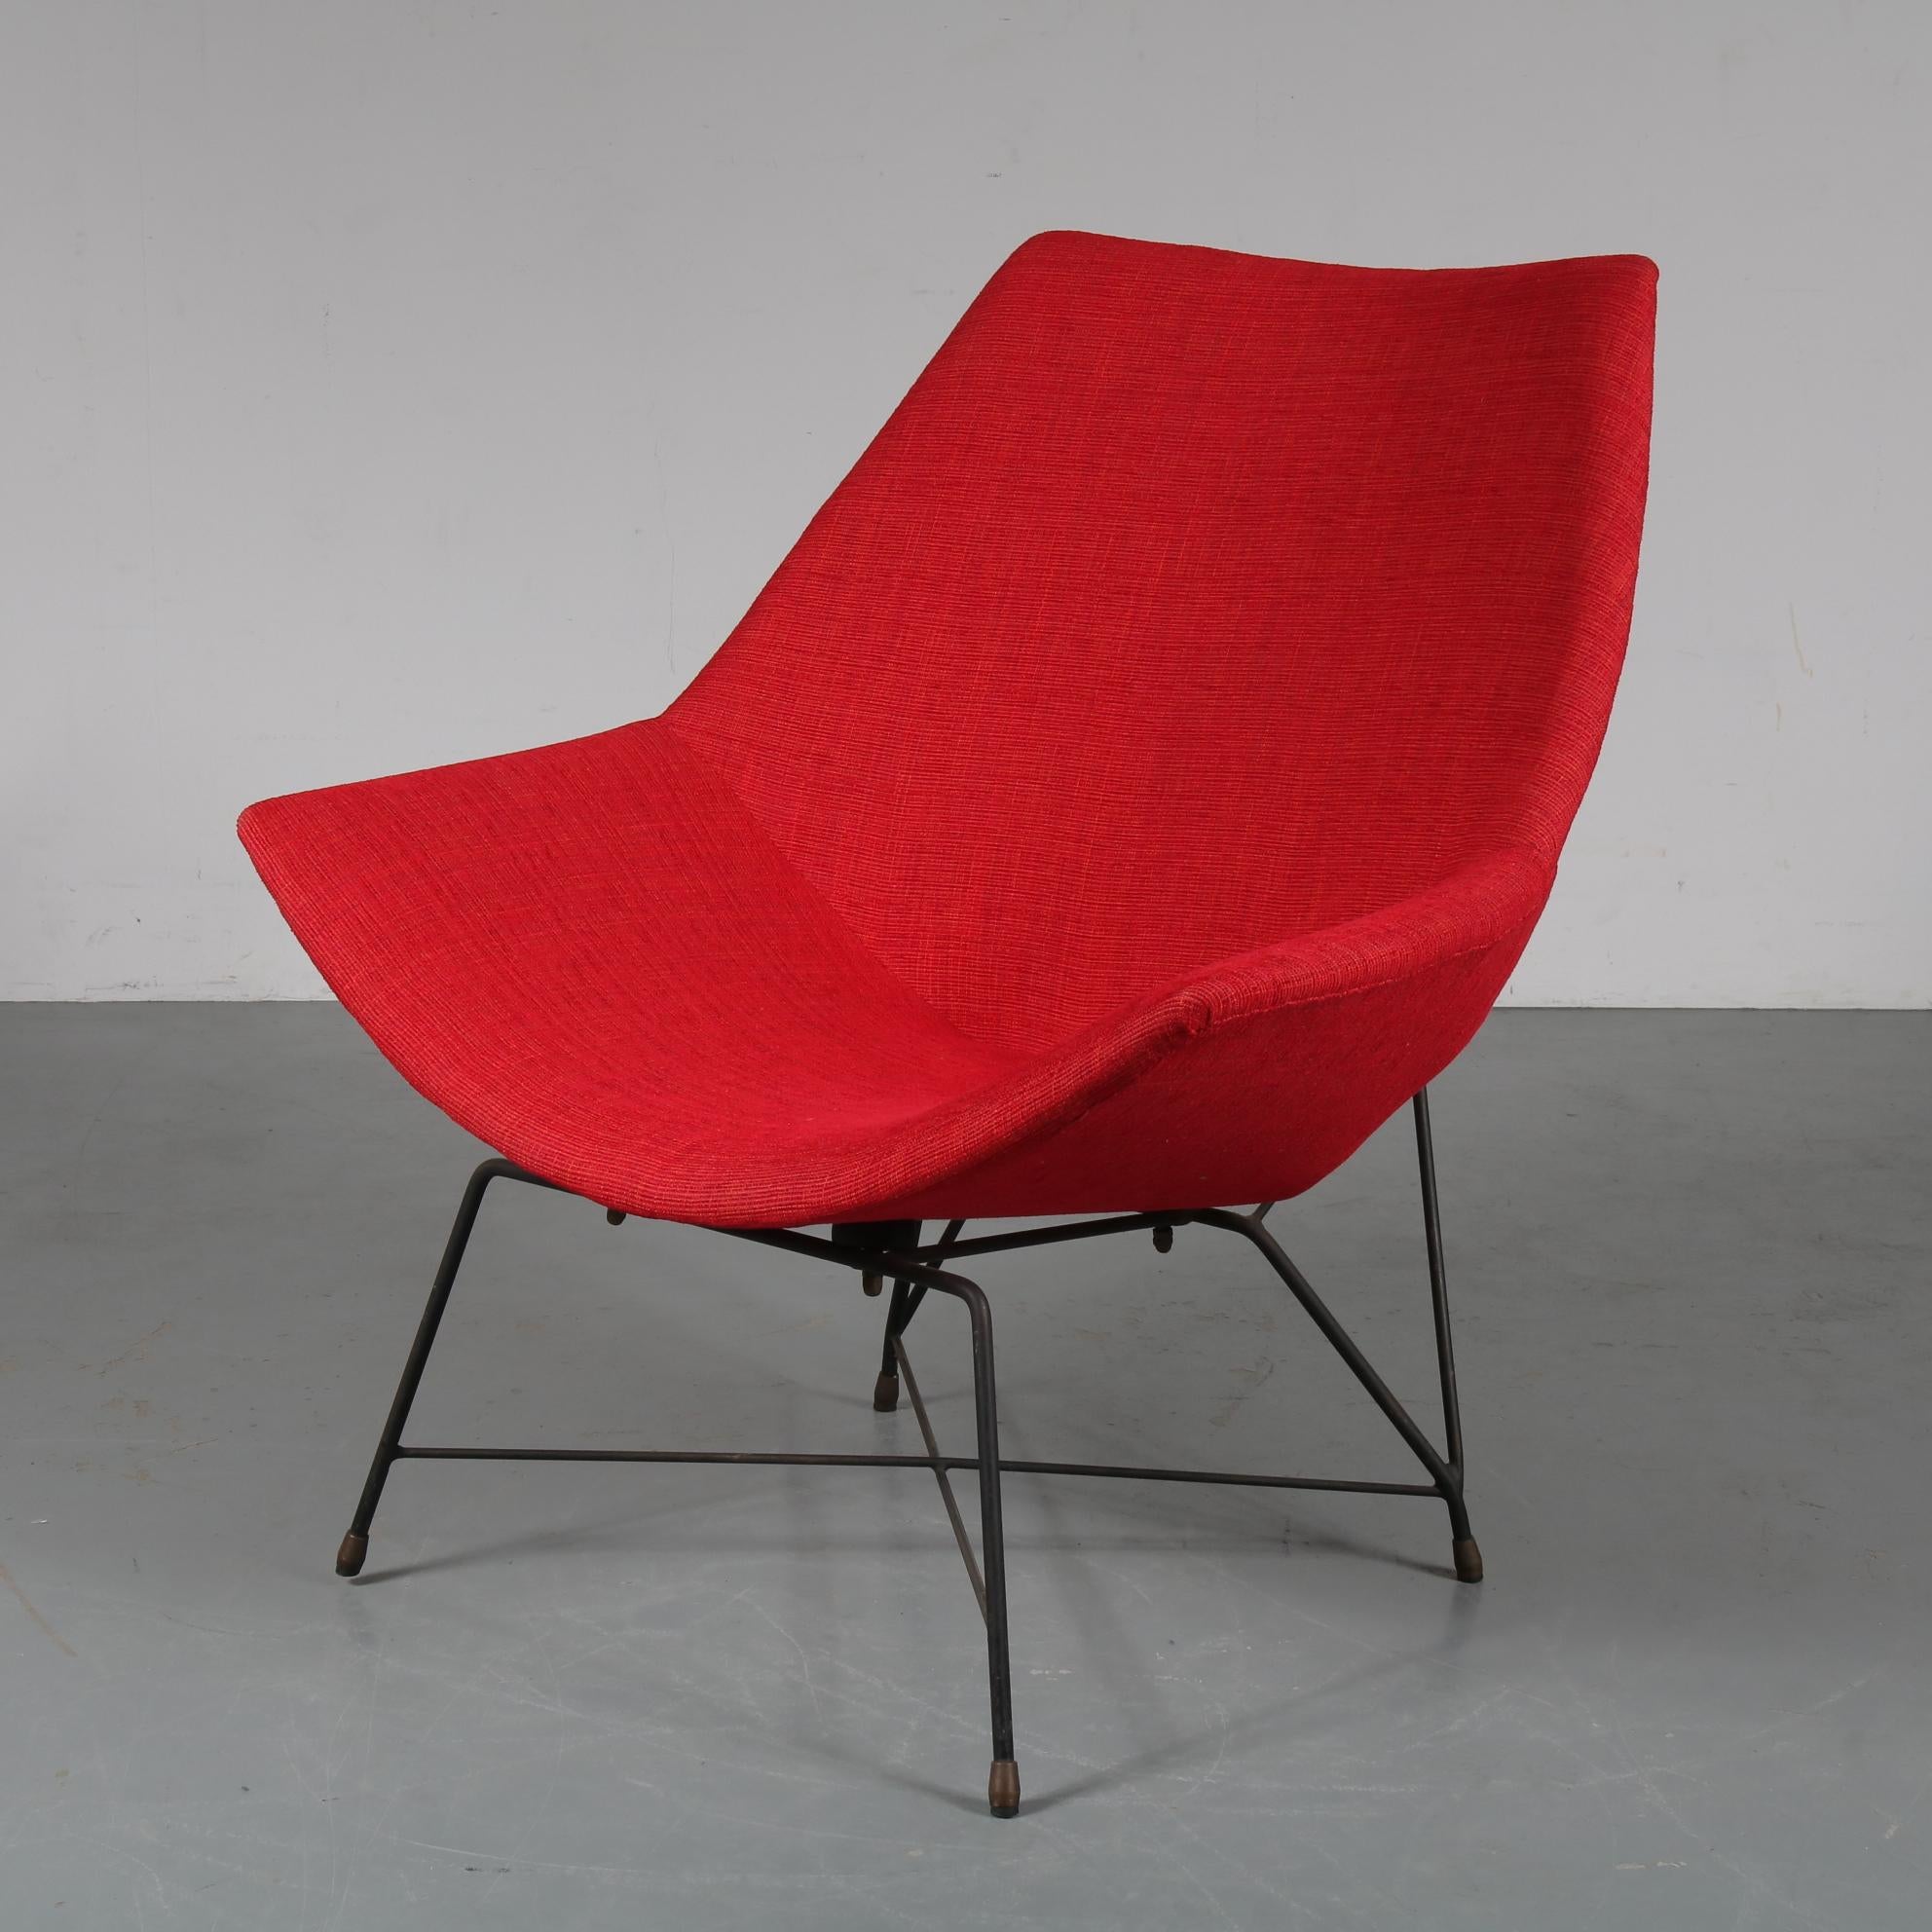 A stunning easy chair by Augusto Bozzi, manufactured by Saporiti in Italy in 1954.

This is a very rare and much sought after piece, the model is named 